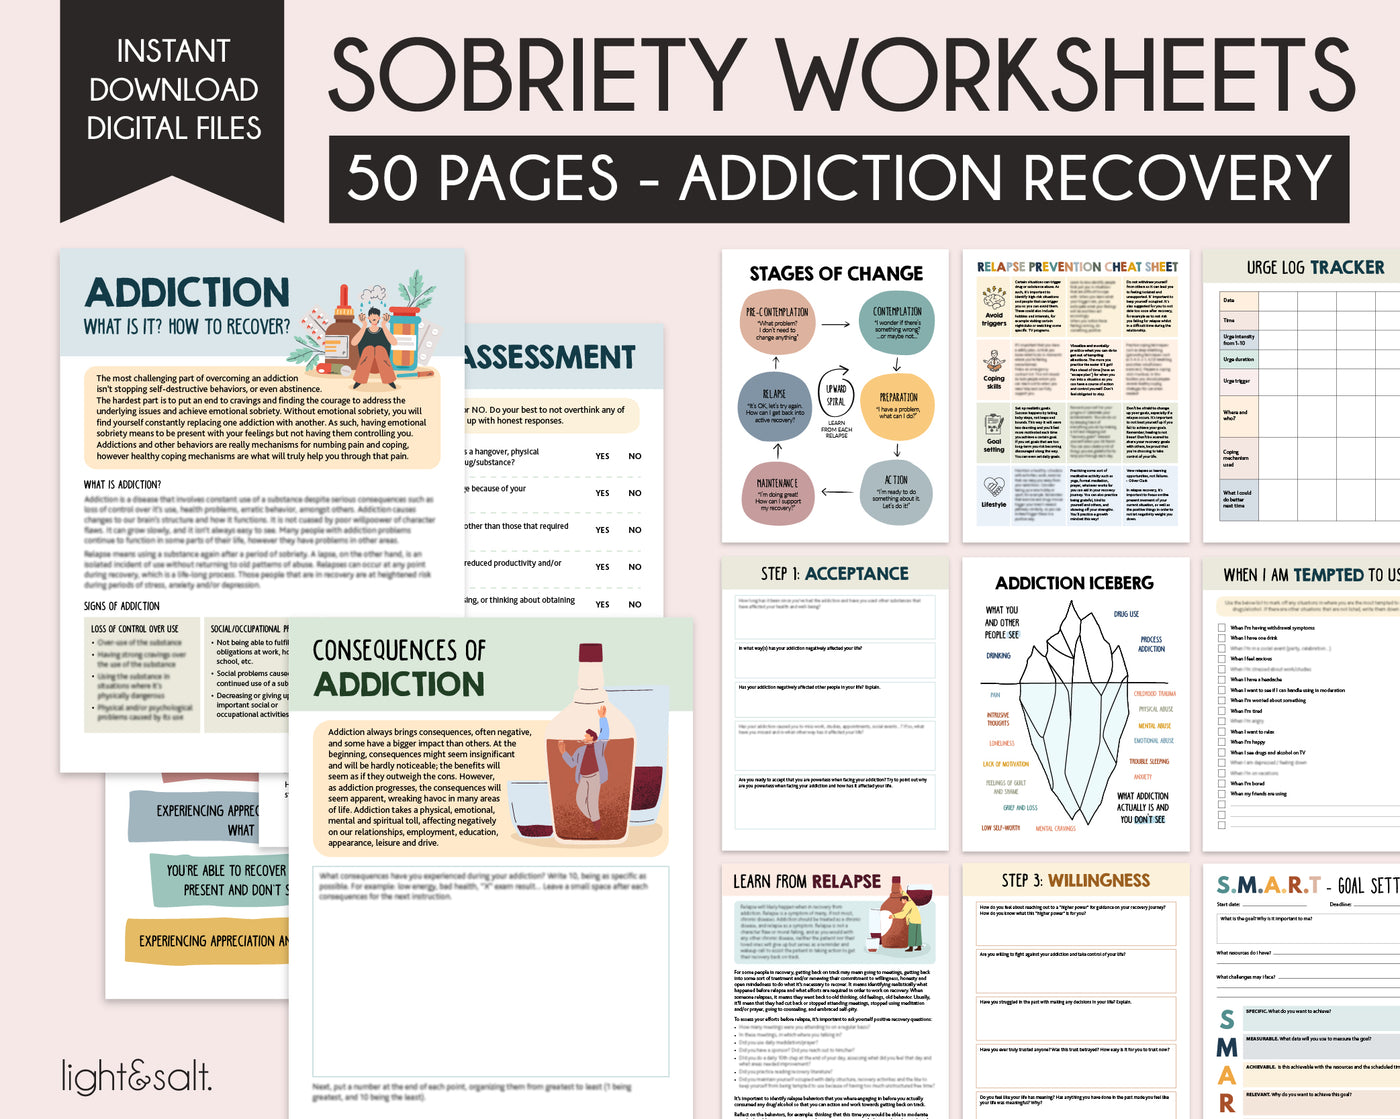 Sobriety Worksheets, therapy workbook, addiction recovery, Relapse Prevention plan, Recovery, AA, Addiction, sober life, stages of change - LightandSaltDesign